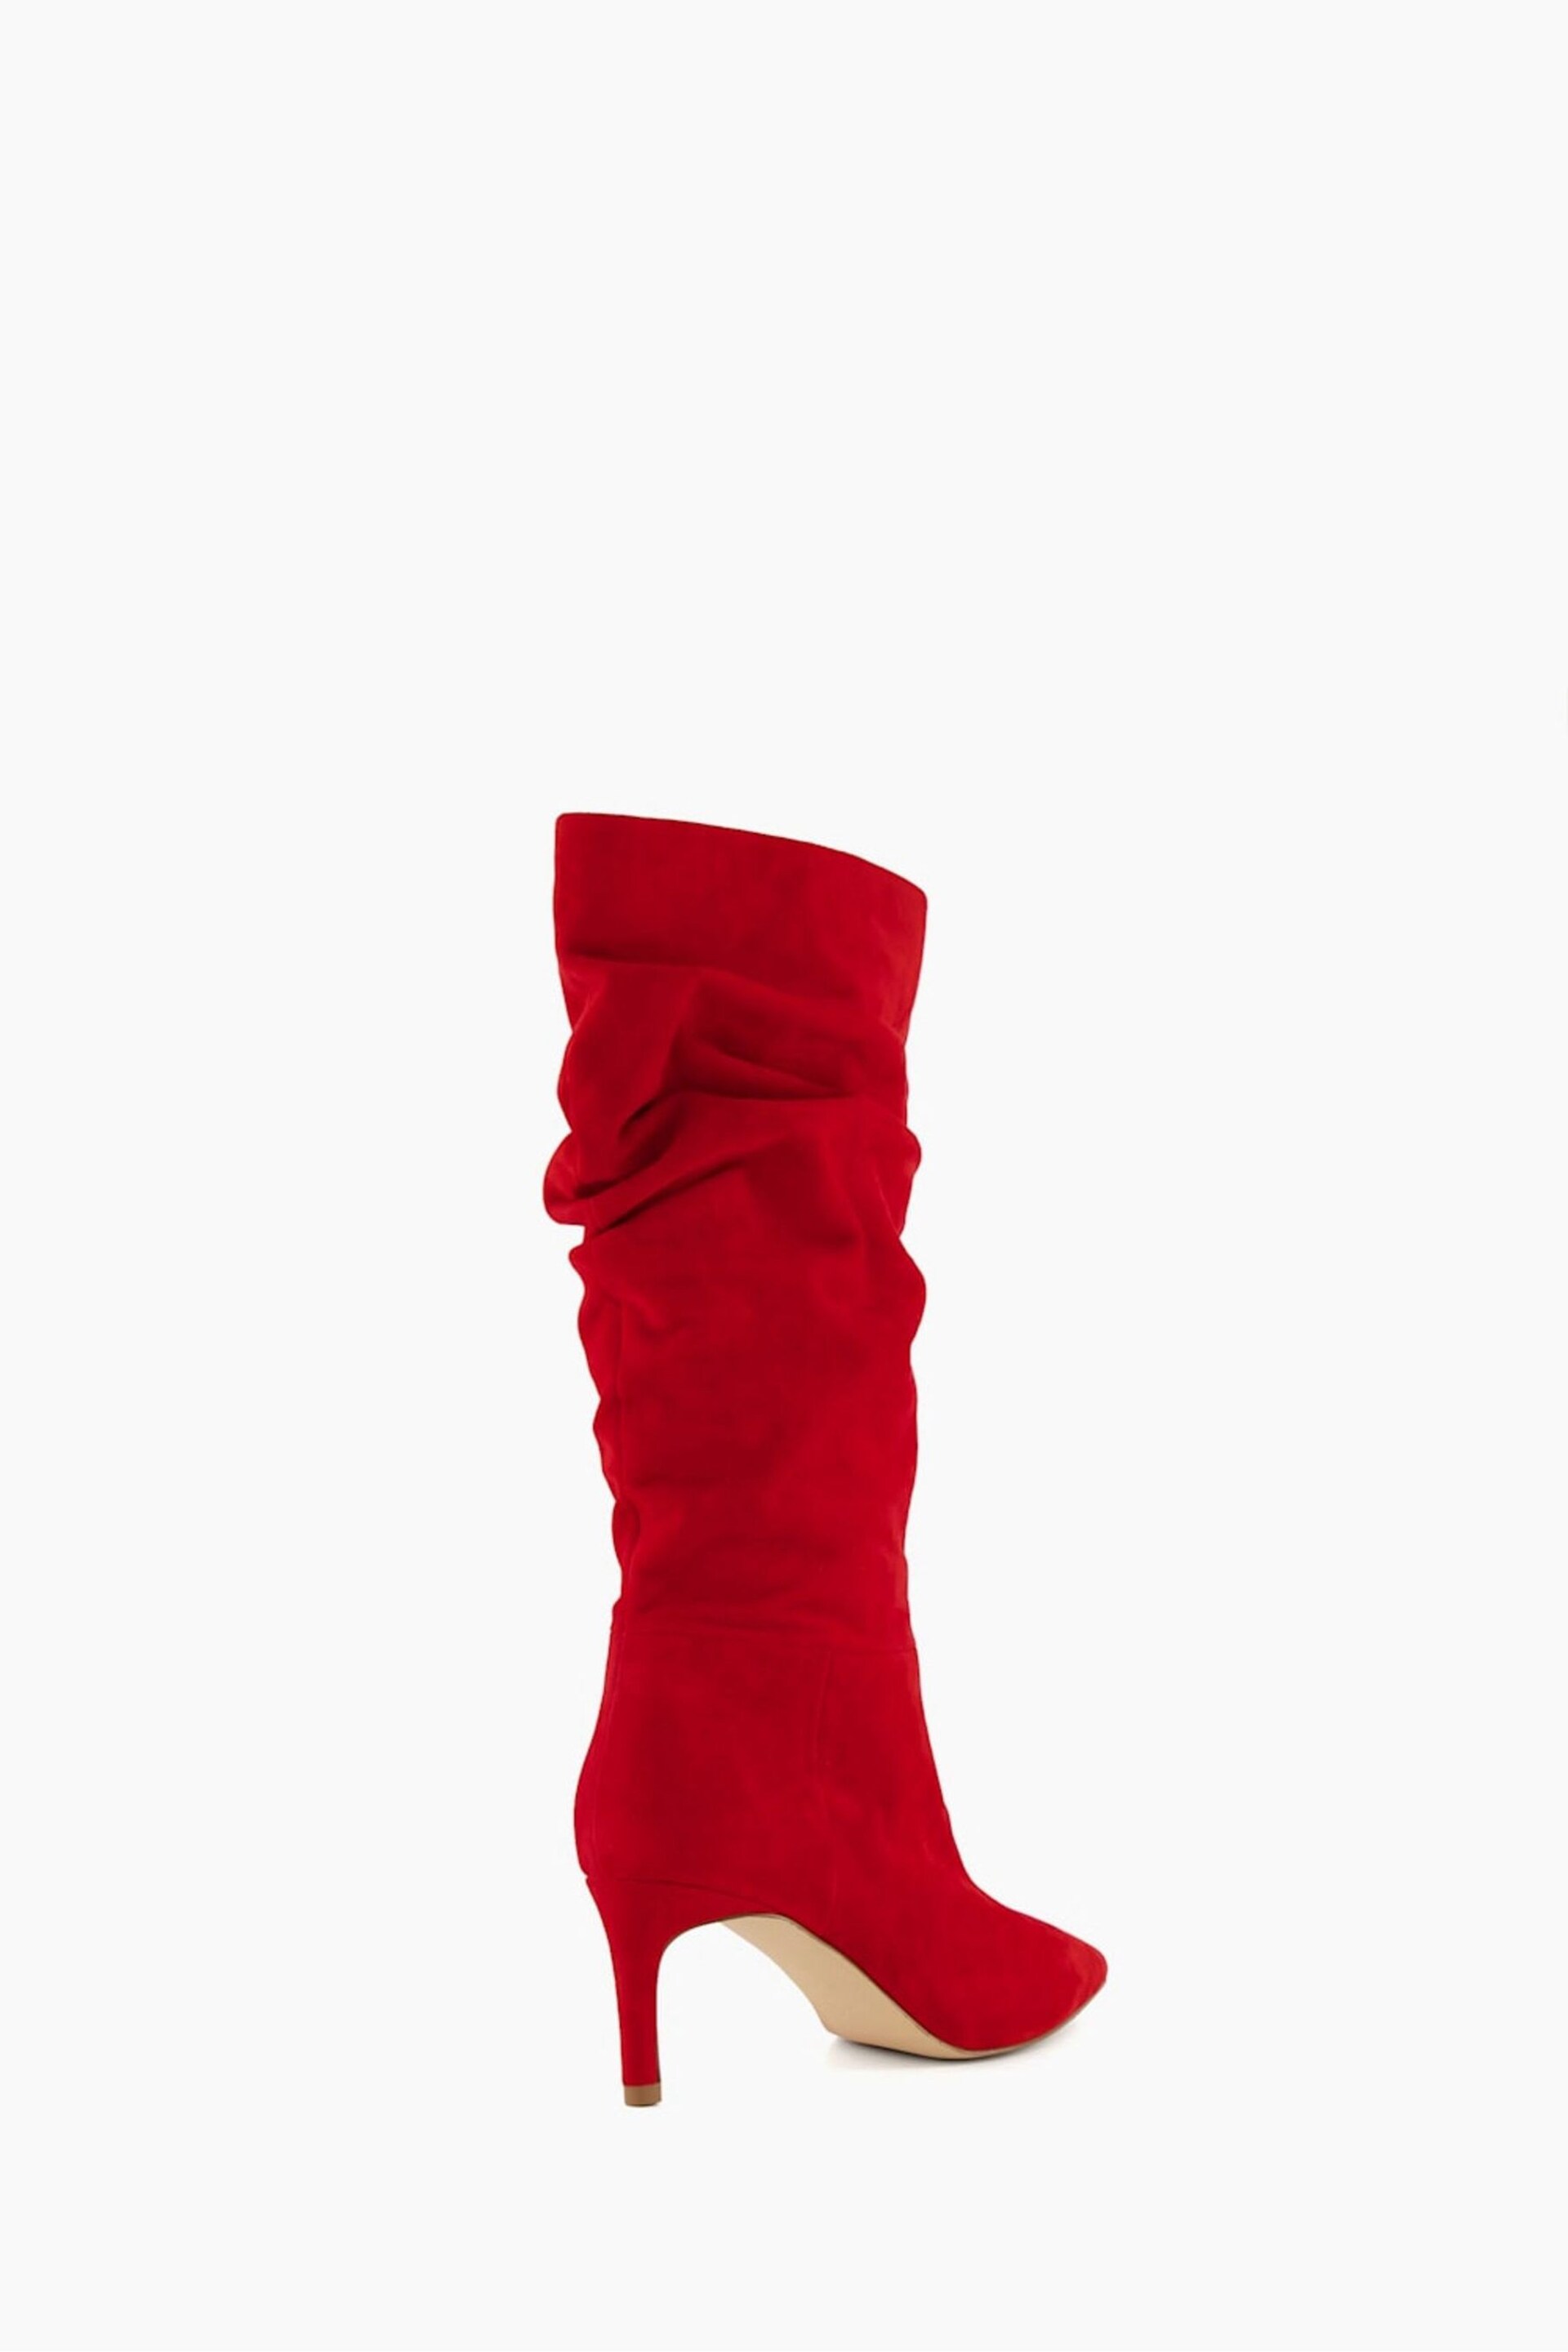 Dune London Red Slouch Ruched Suede Heeled Boots - Image 3 of 4